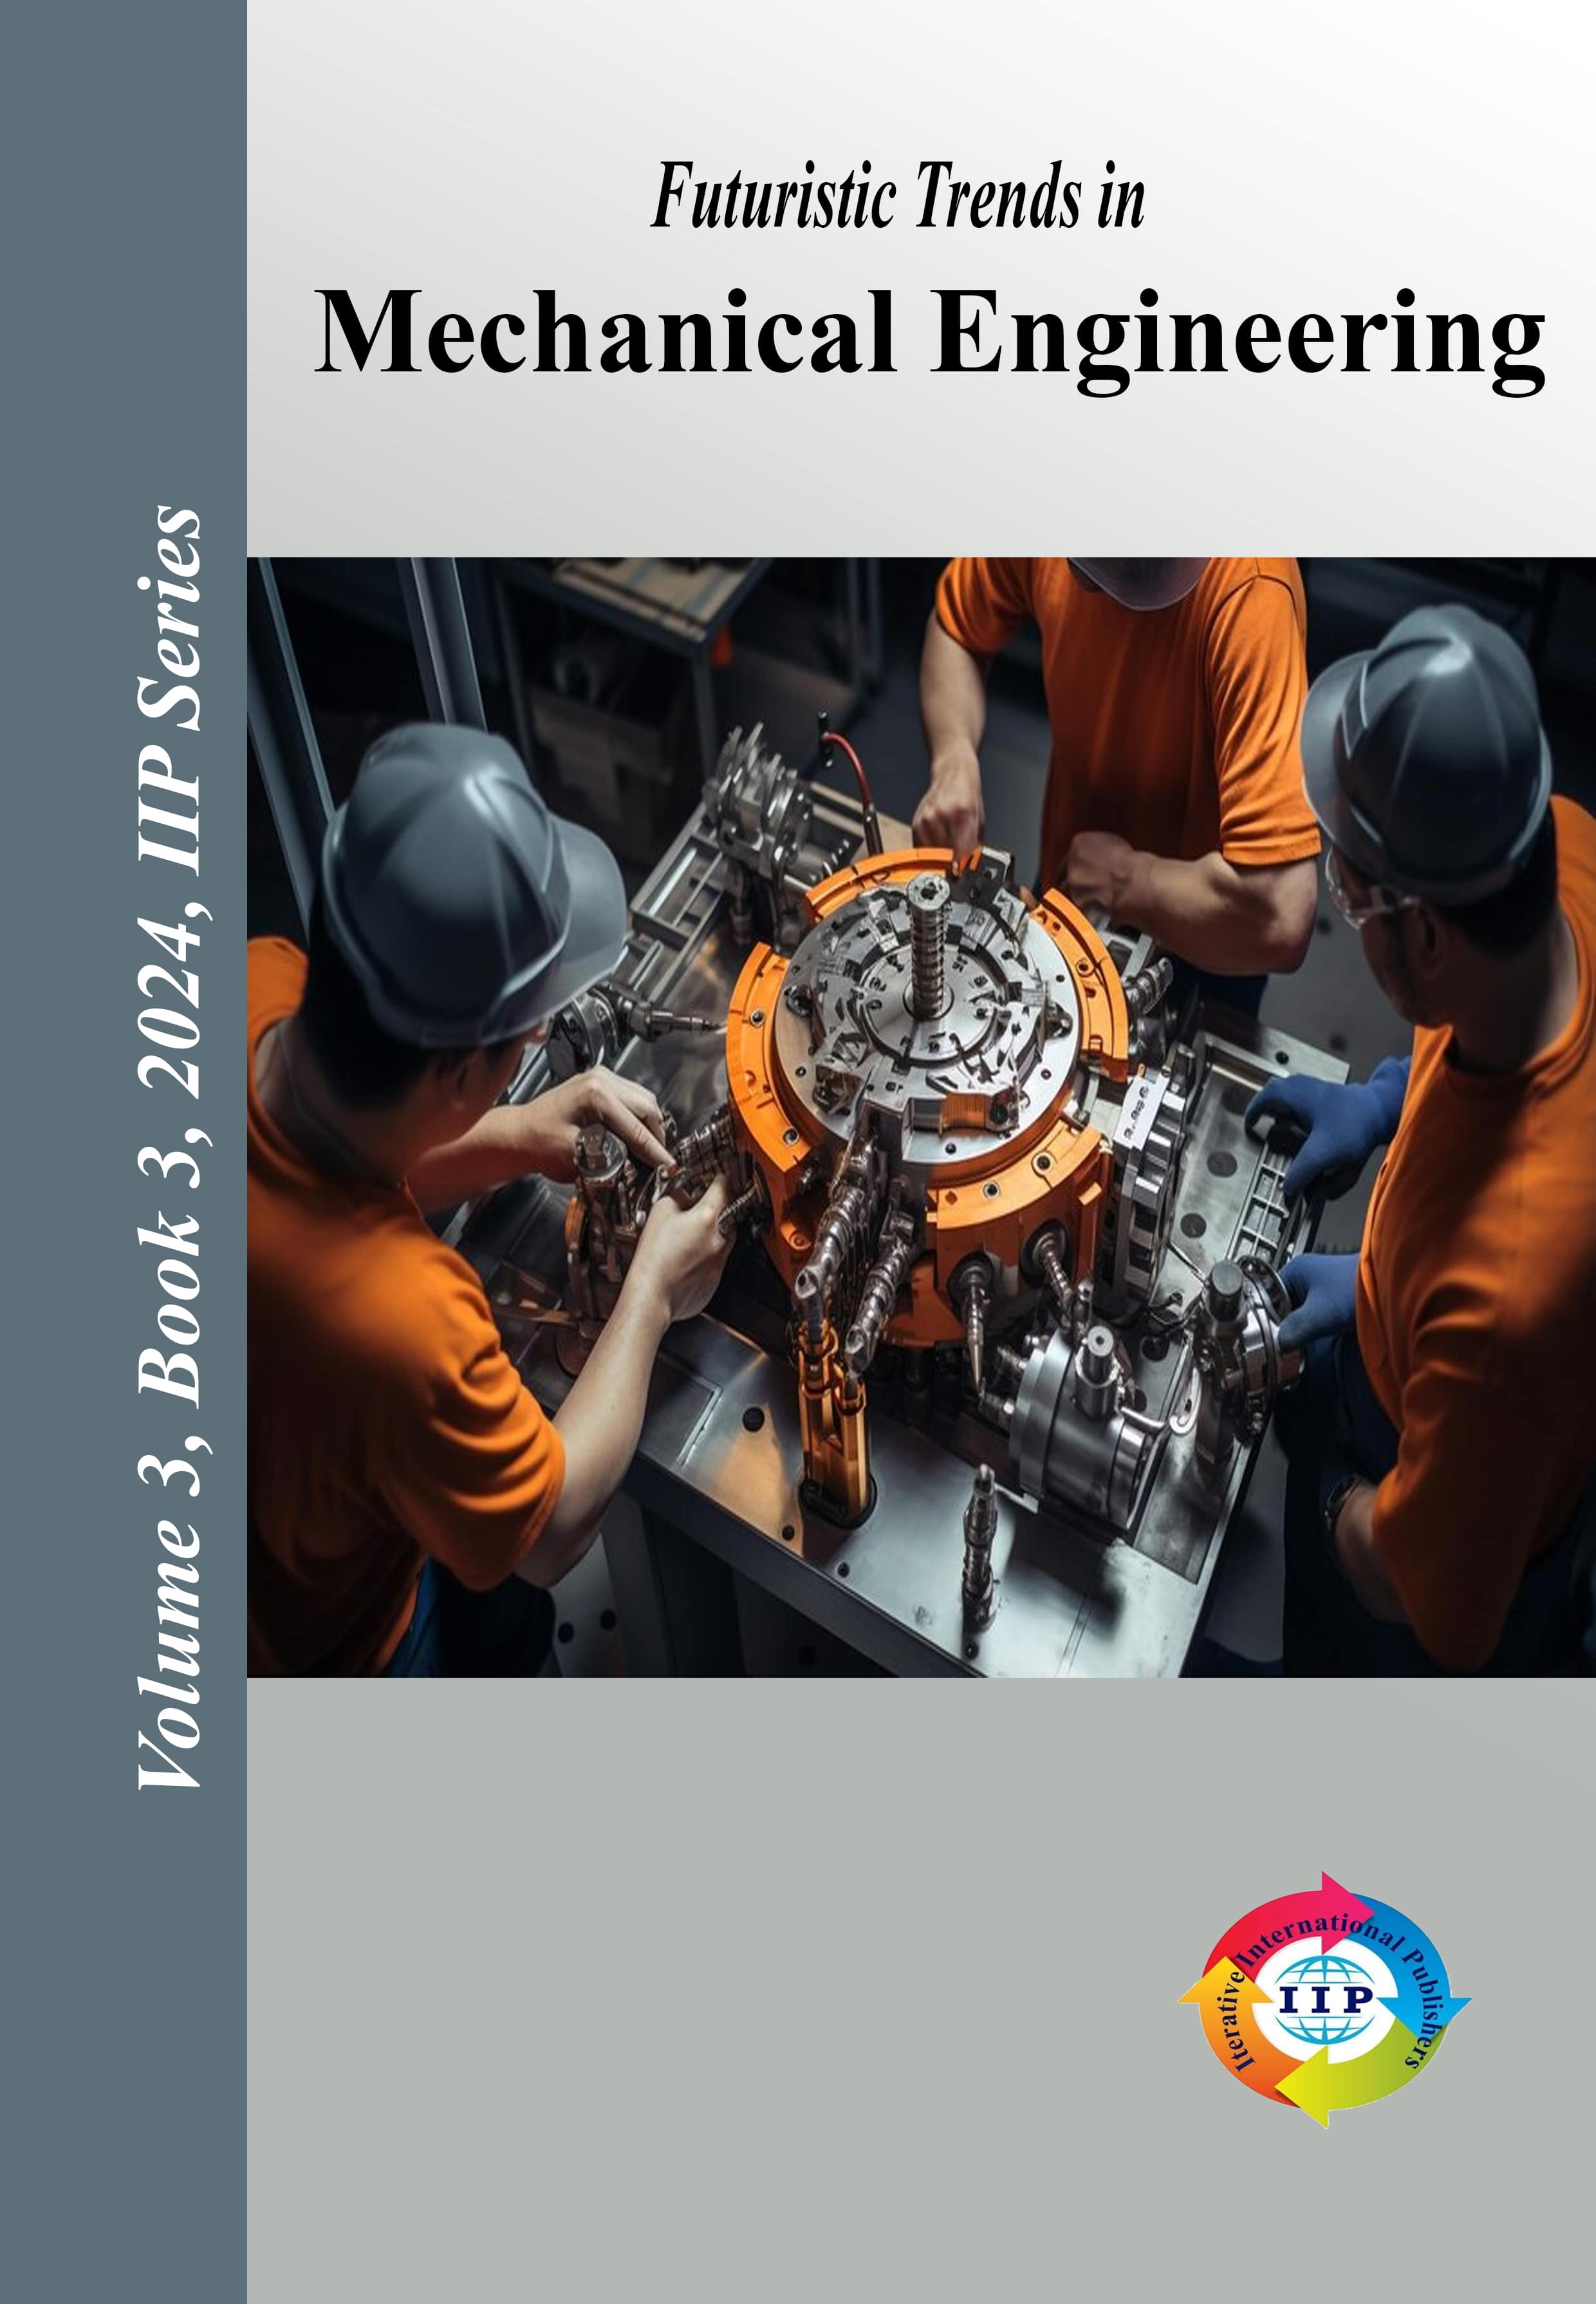 Futuristic Trends in Mechanical Engineering Volume 3 Book 3